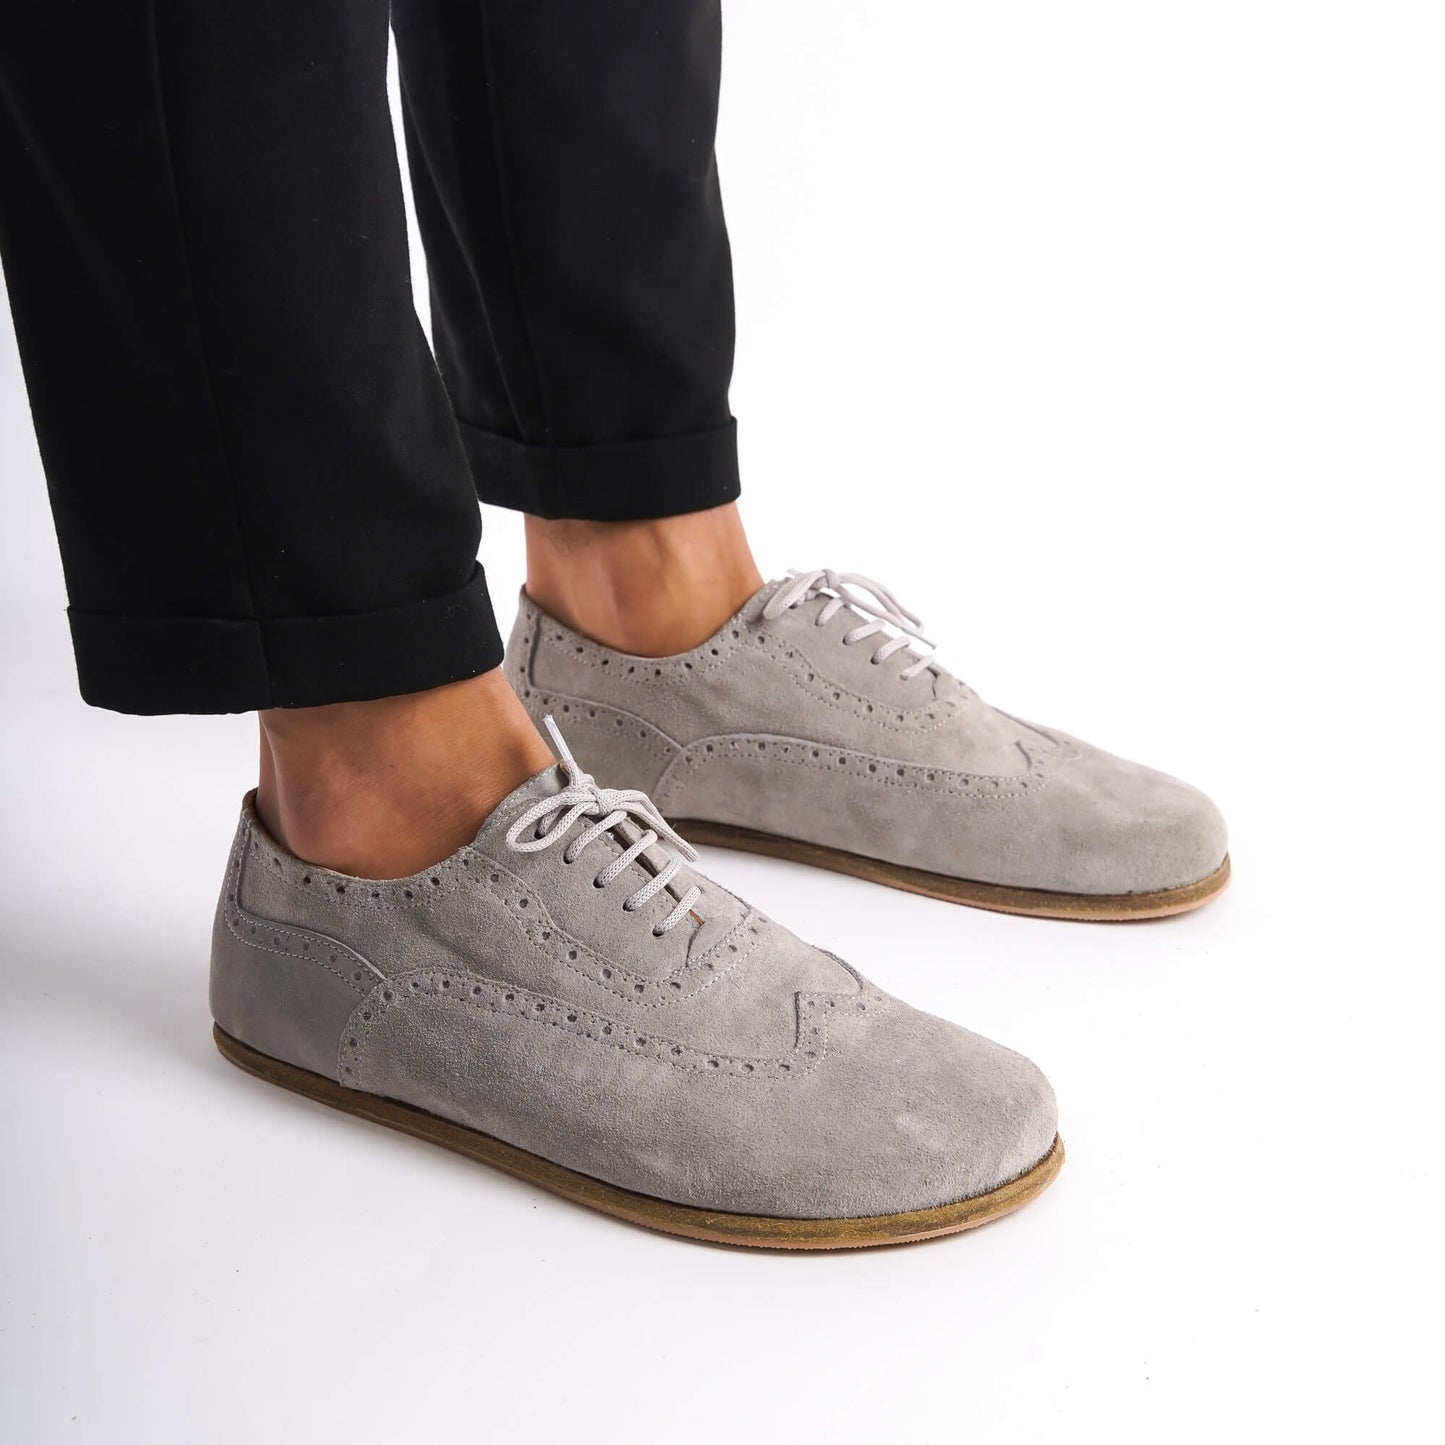 Man posing in gray suede barefoot Oxfords, emphasizing their classic brogue design and fit.